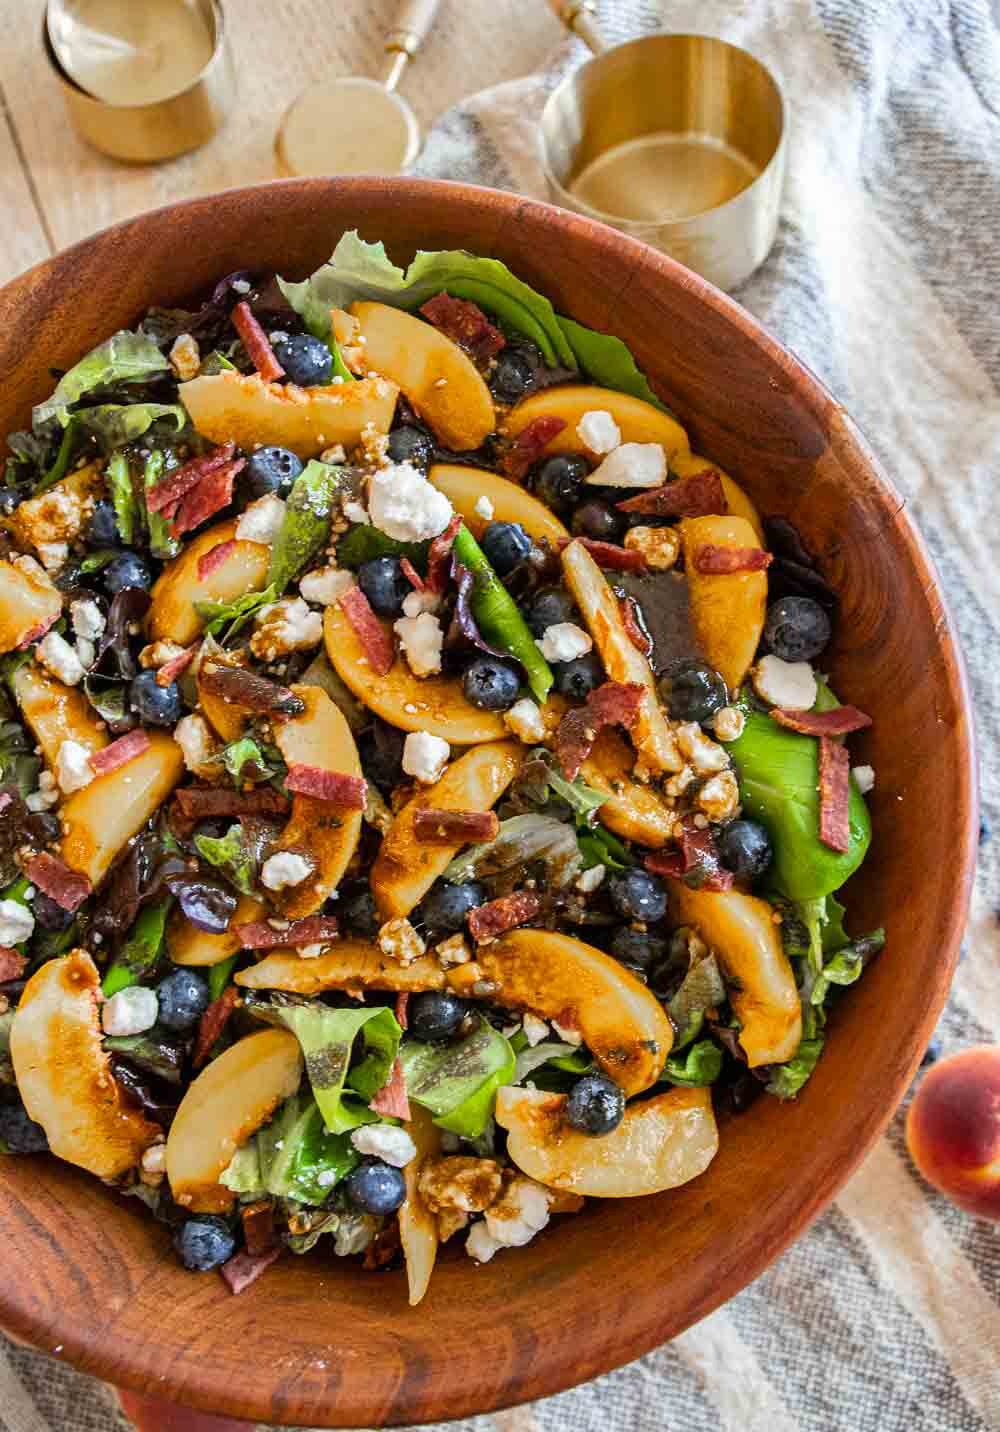 Peach Salad with Bacon, Blueberries, Feta and Balsamic Dressing